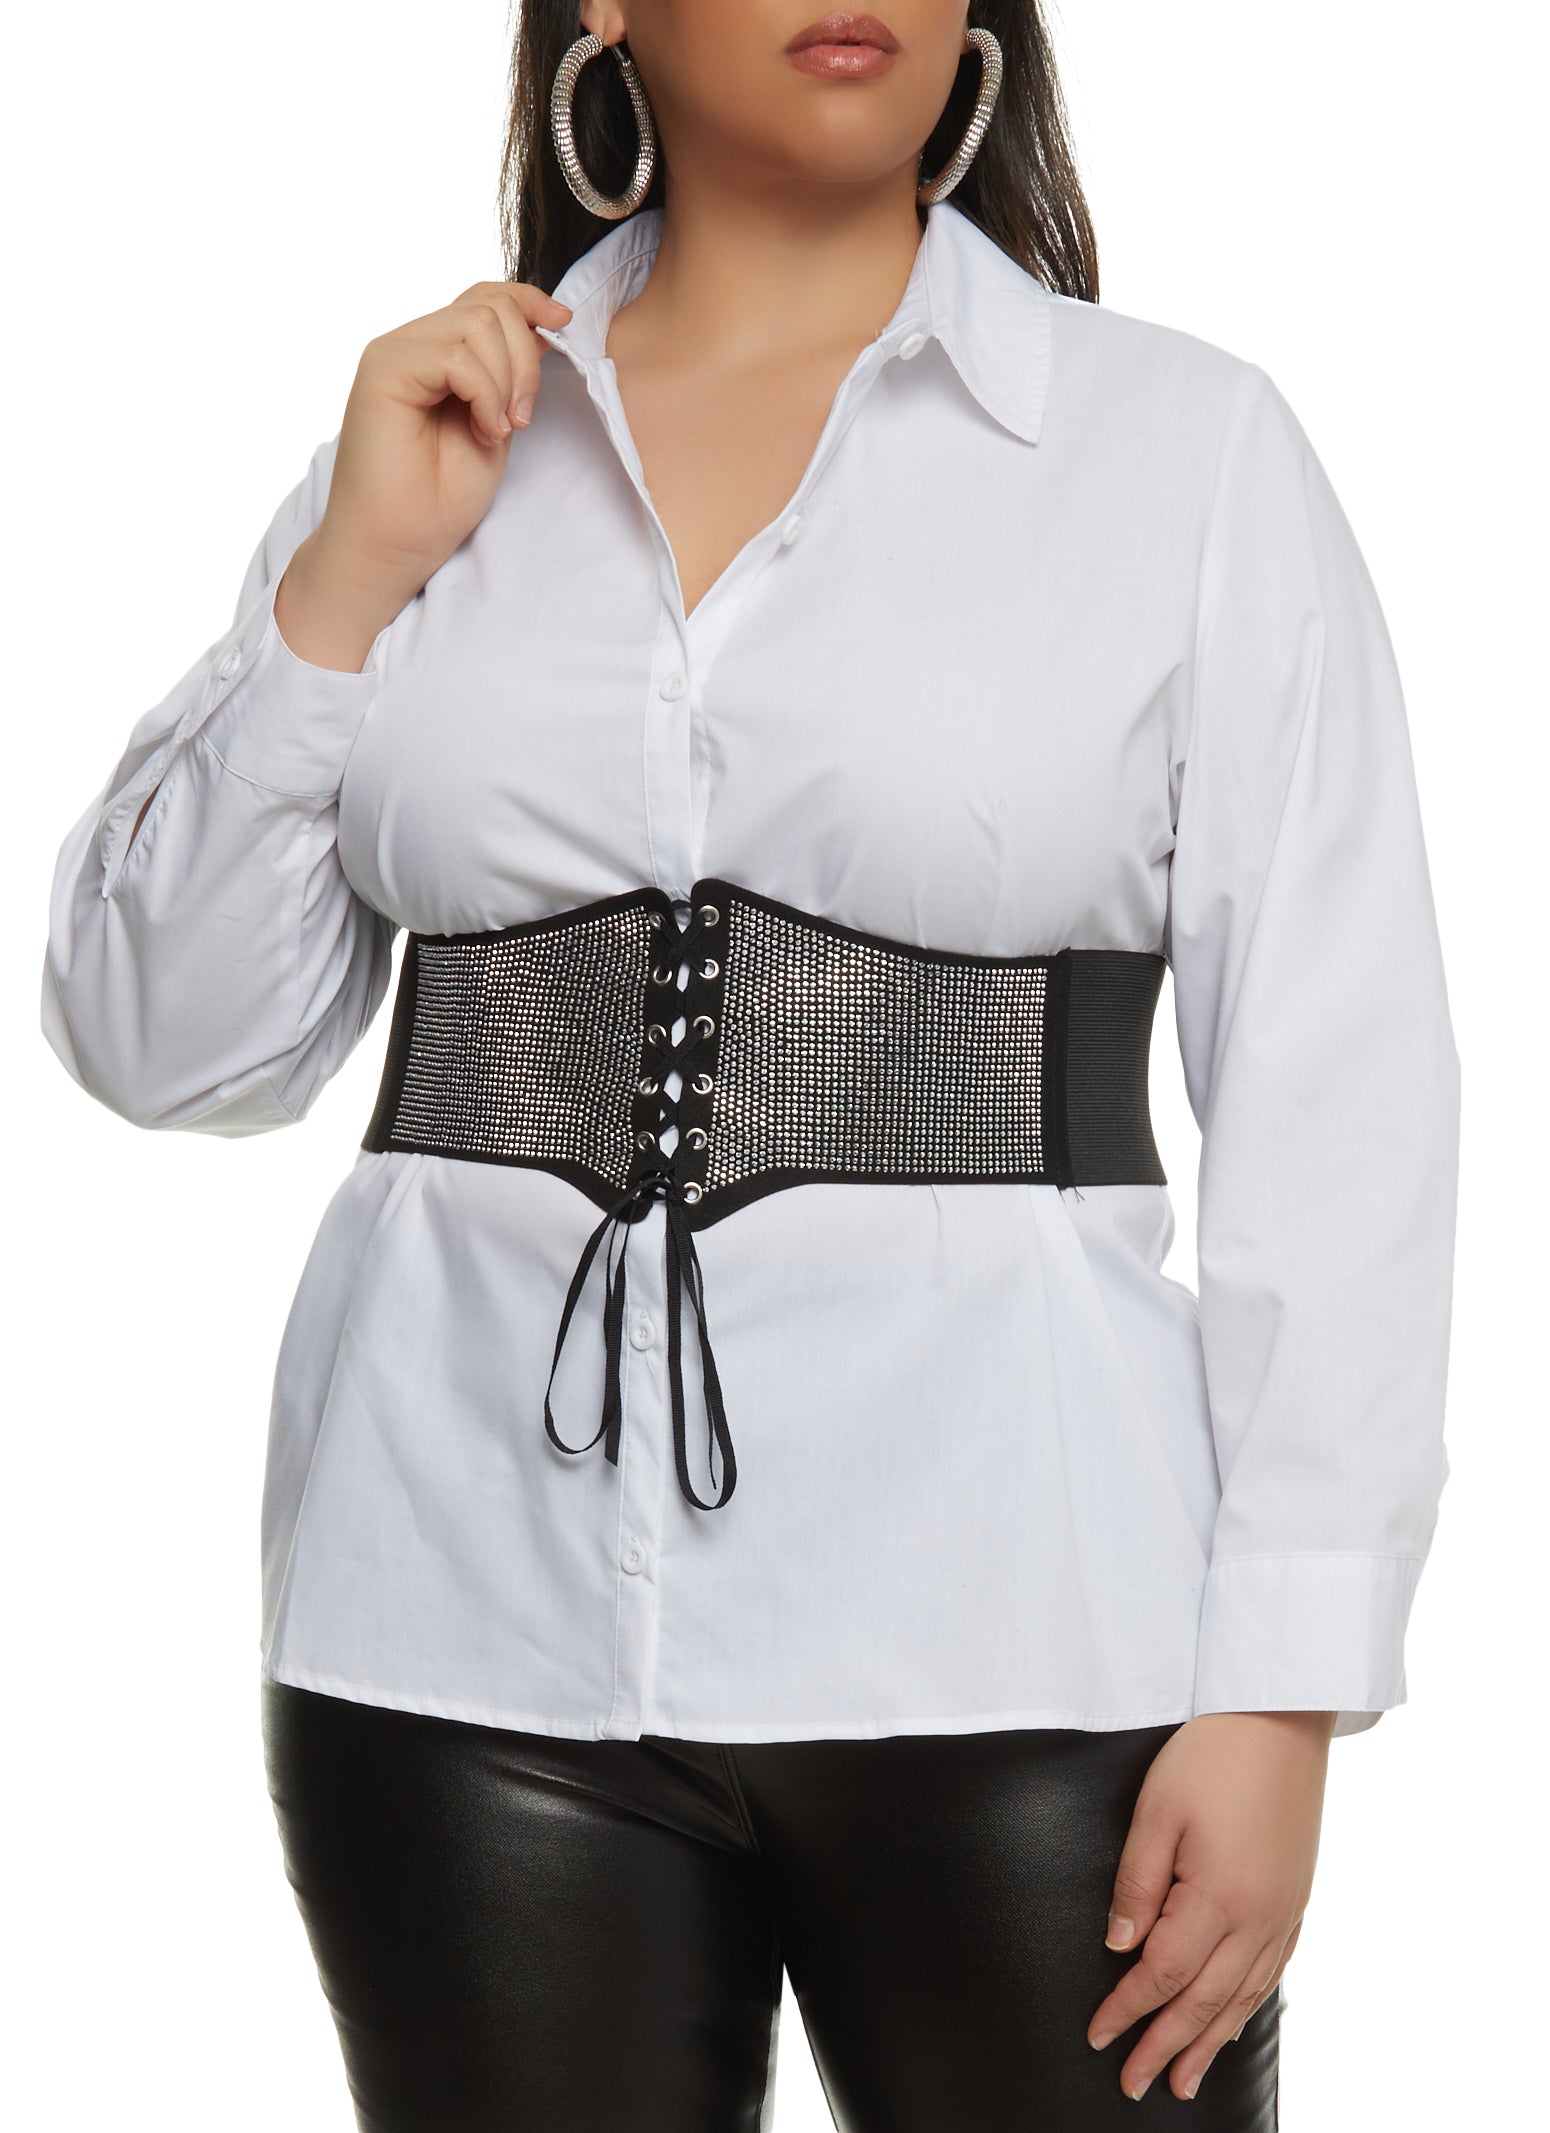 How To Wear Corsets For All Occasions - Corset Belt & Casual Shirt